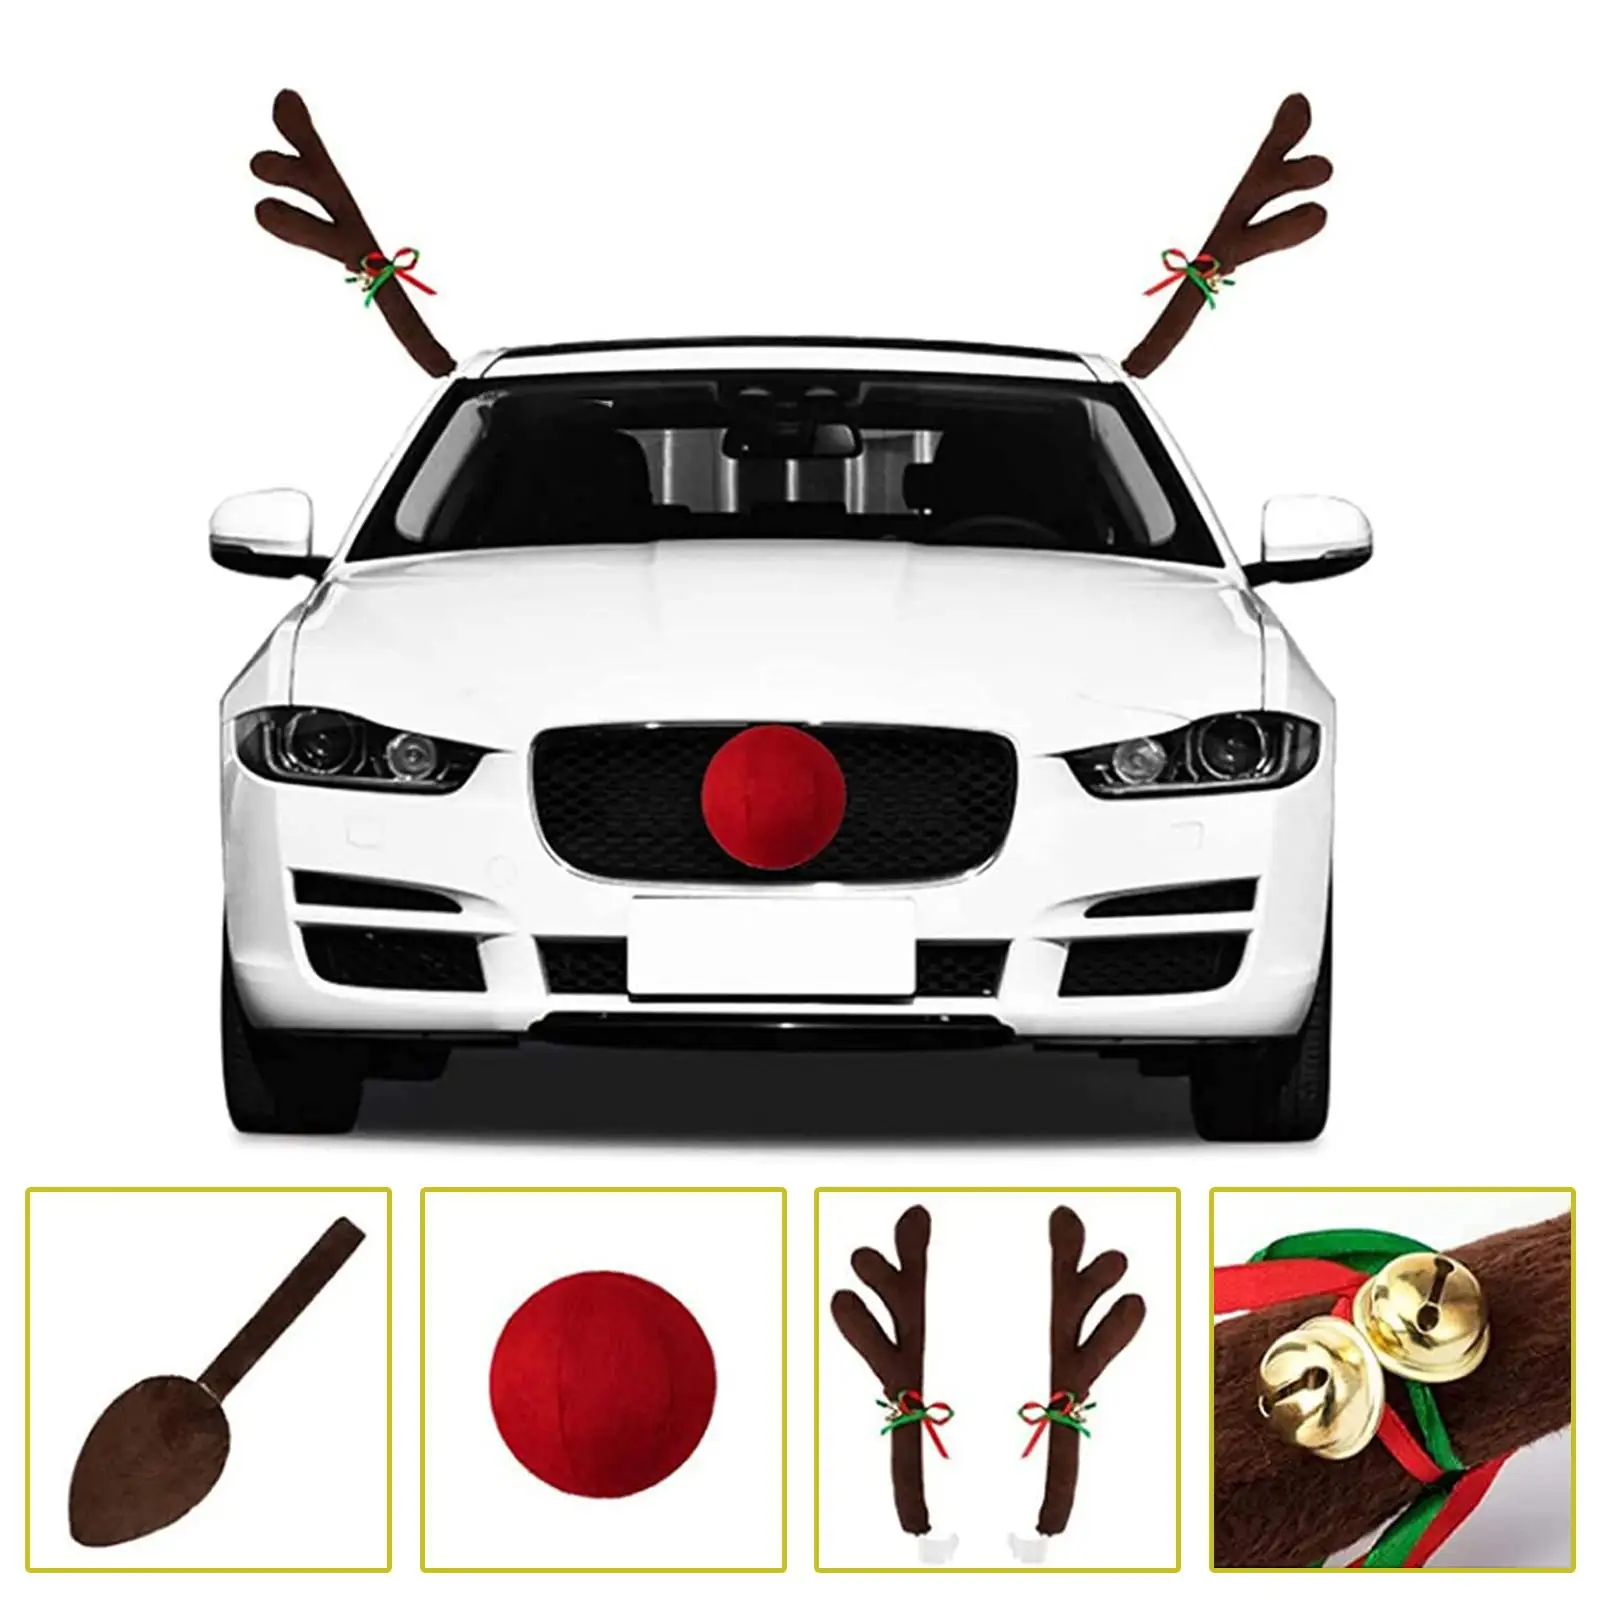 Reindeer Antlers for Car Decoration Car Costume Auto Accessories Easy Installation Winter Holiday for Truck SUV Car Van